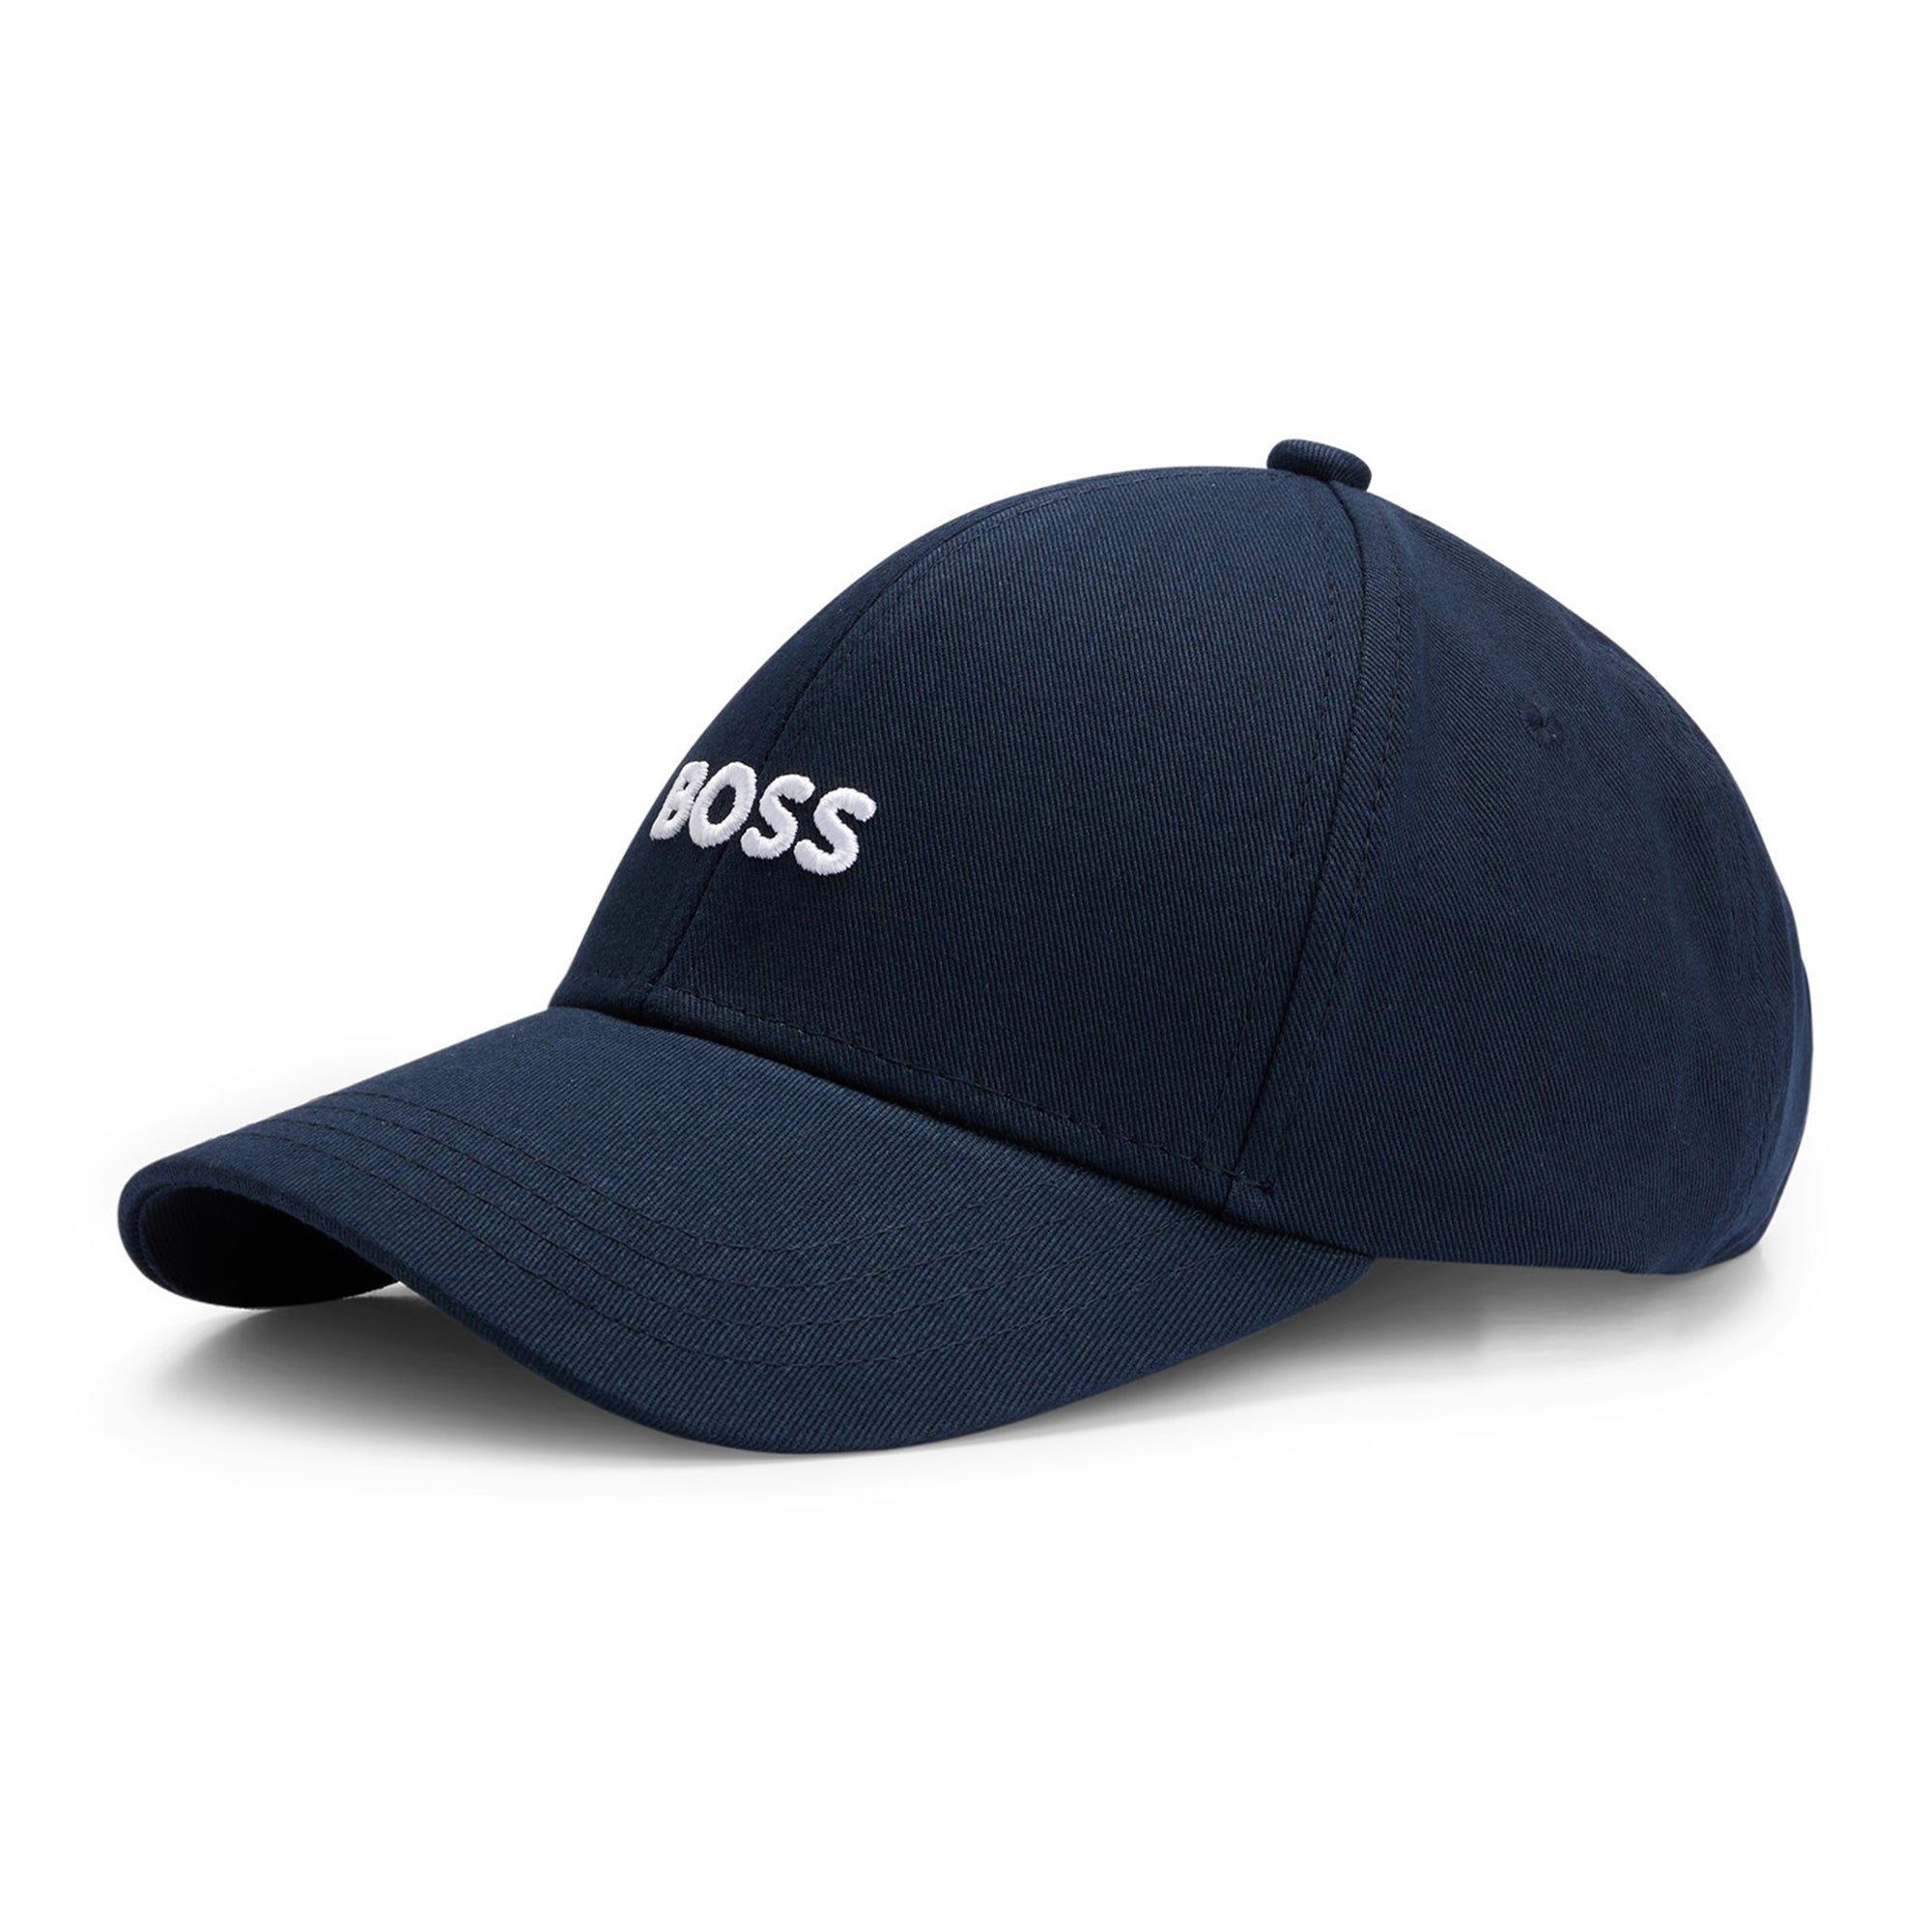 Boss Zed Embroidered Cotton Cap - Navy